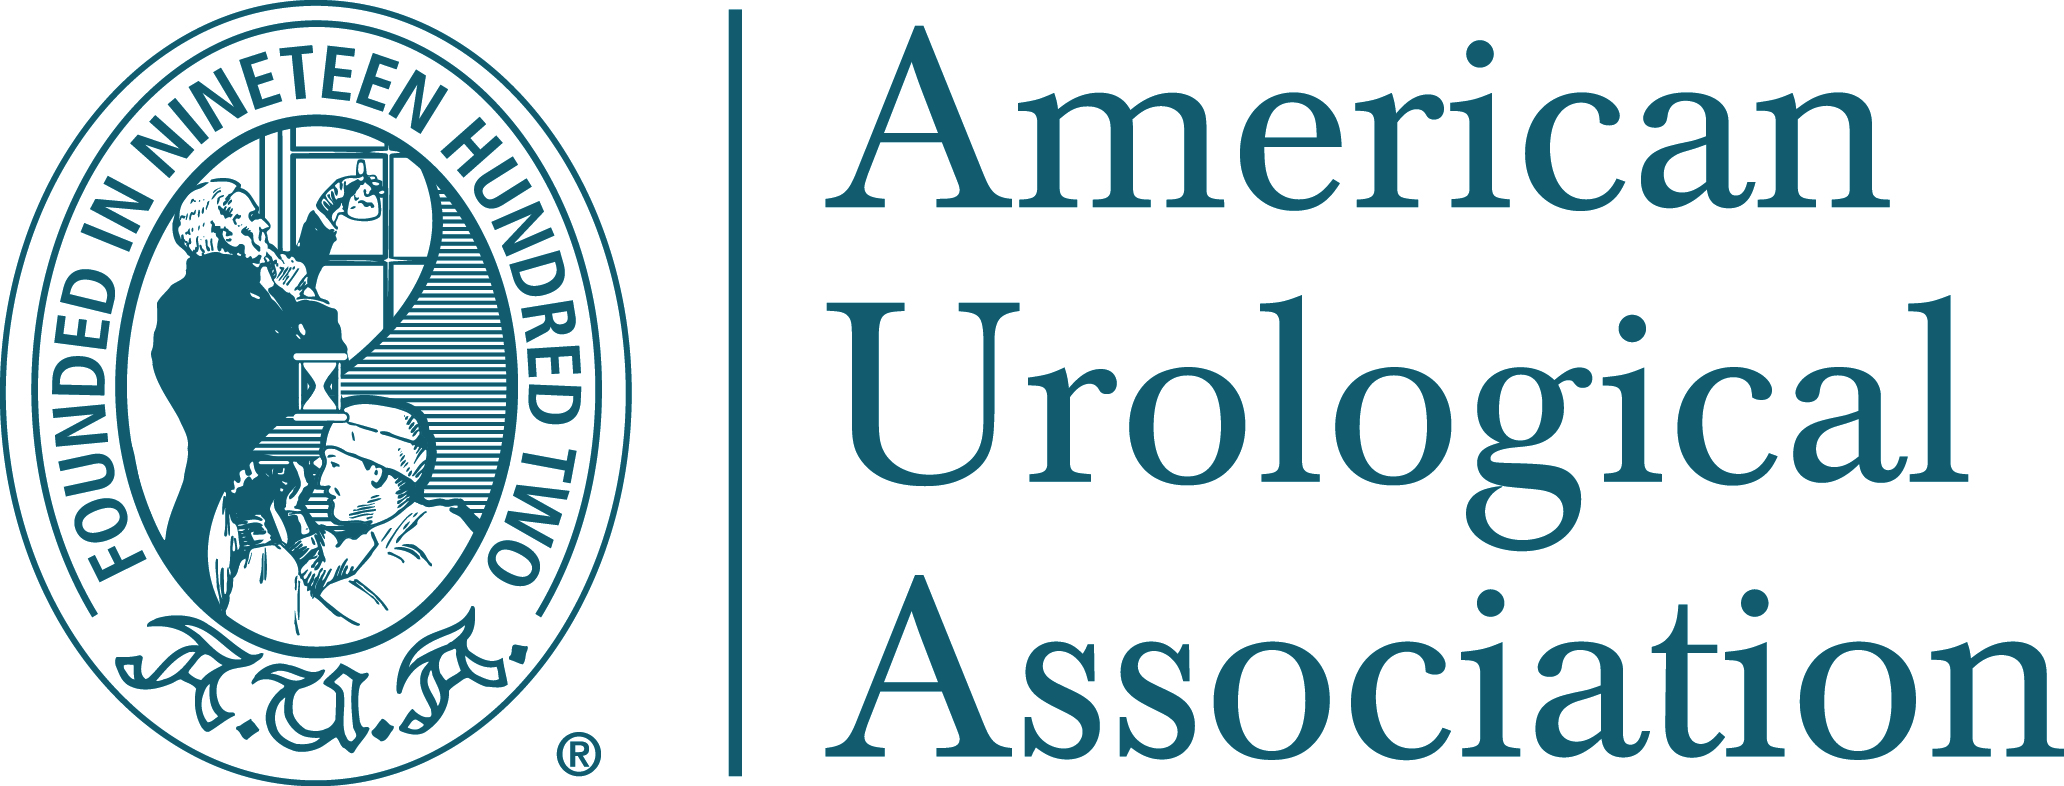 The teal logo for the American Urological Association, an oval with line art inside and the words "Founded in 1902" around it.